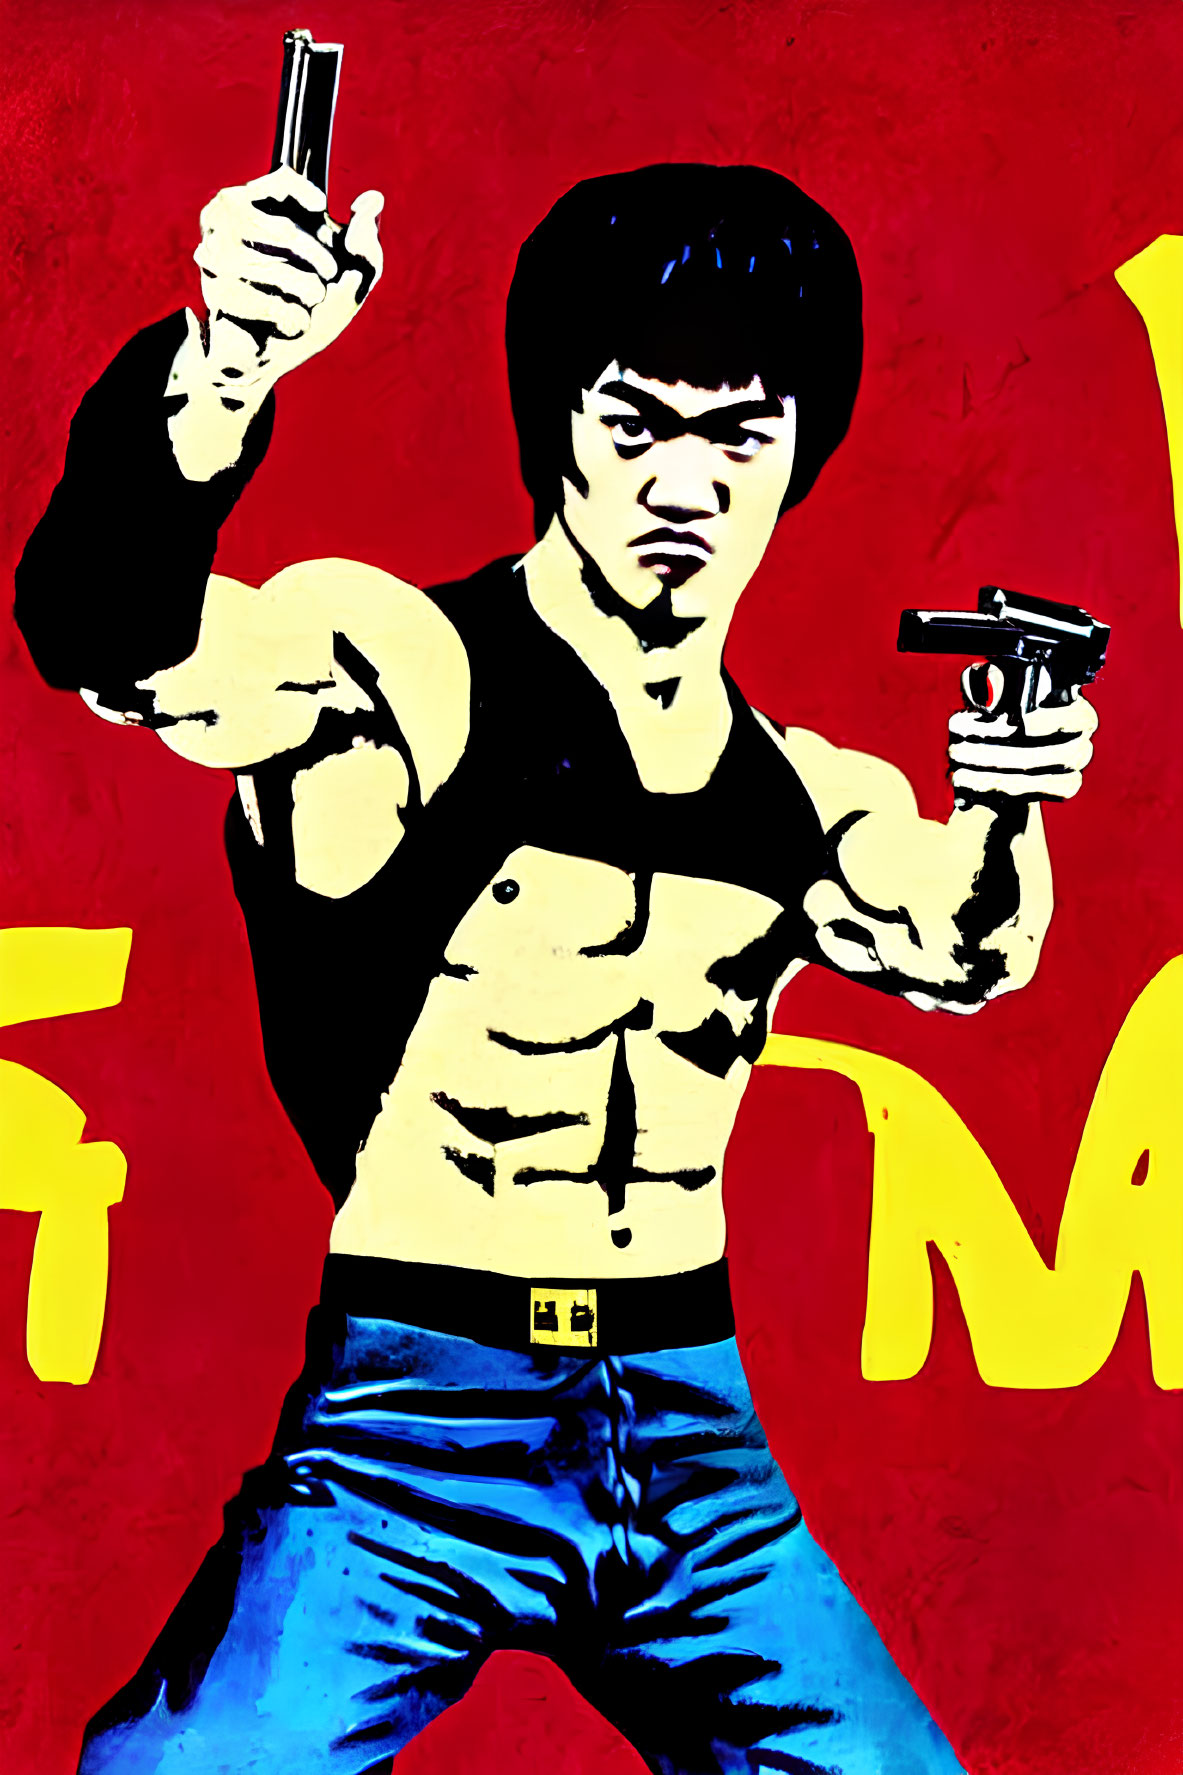 Man in martial arts pose with two guns on red and yellow background